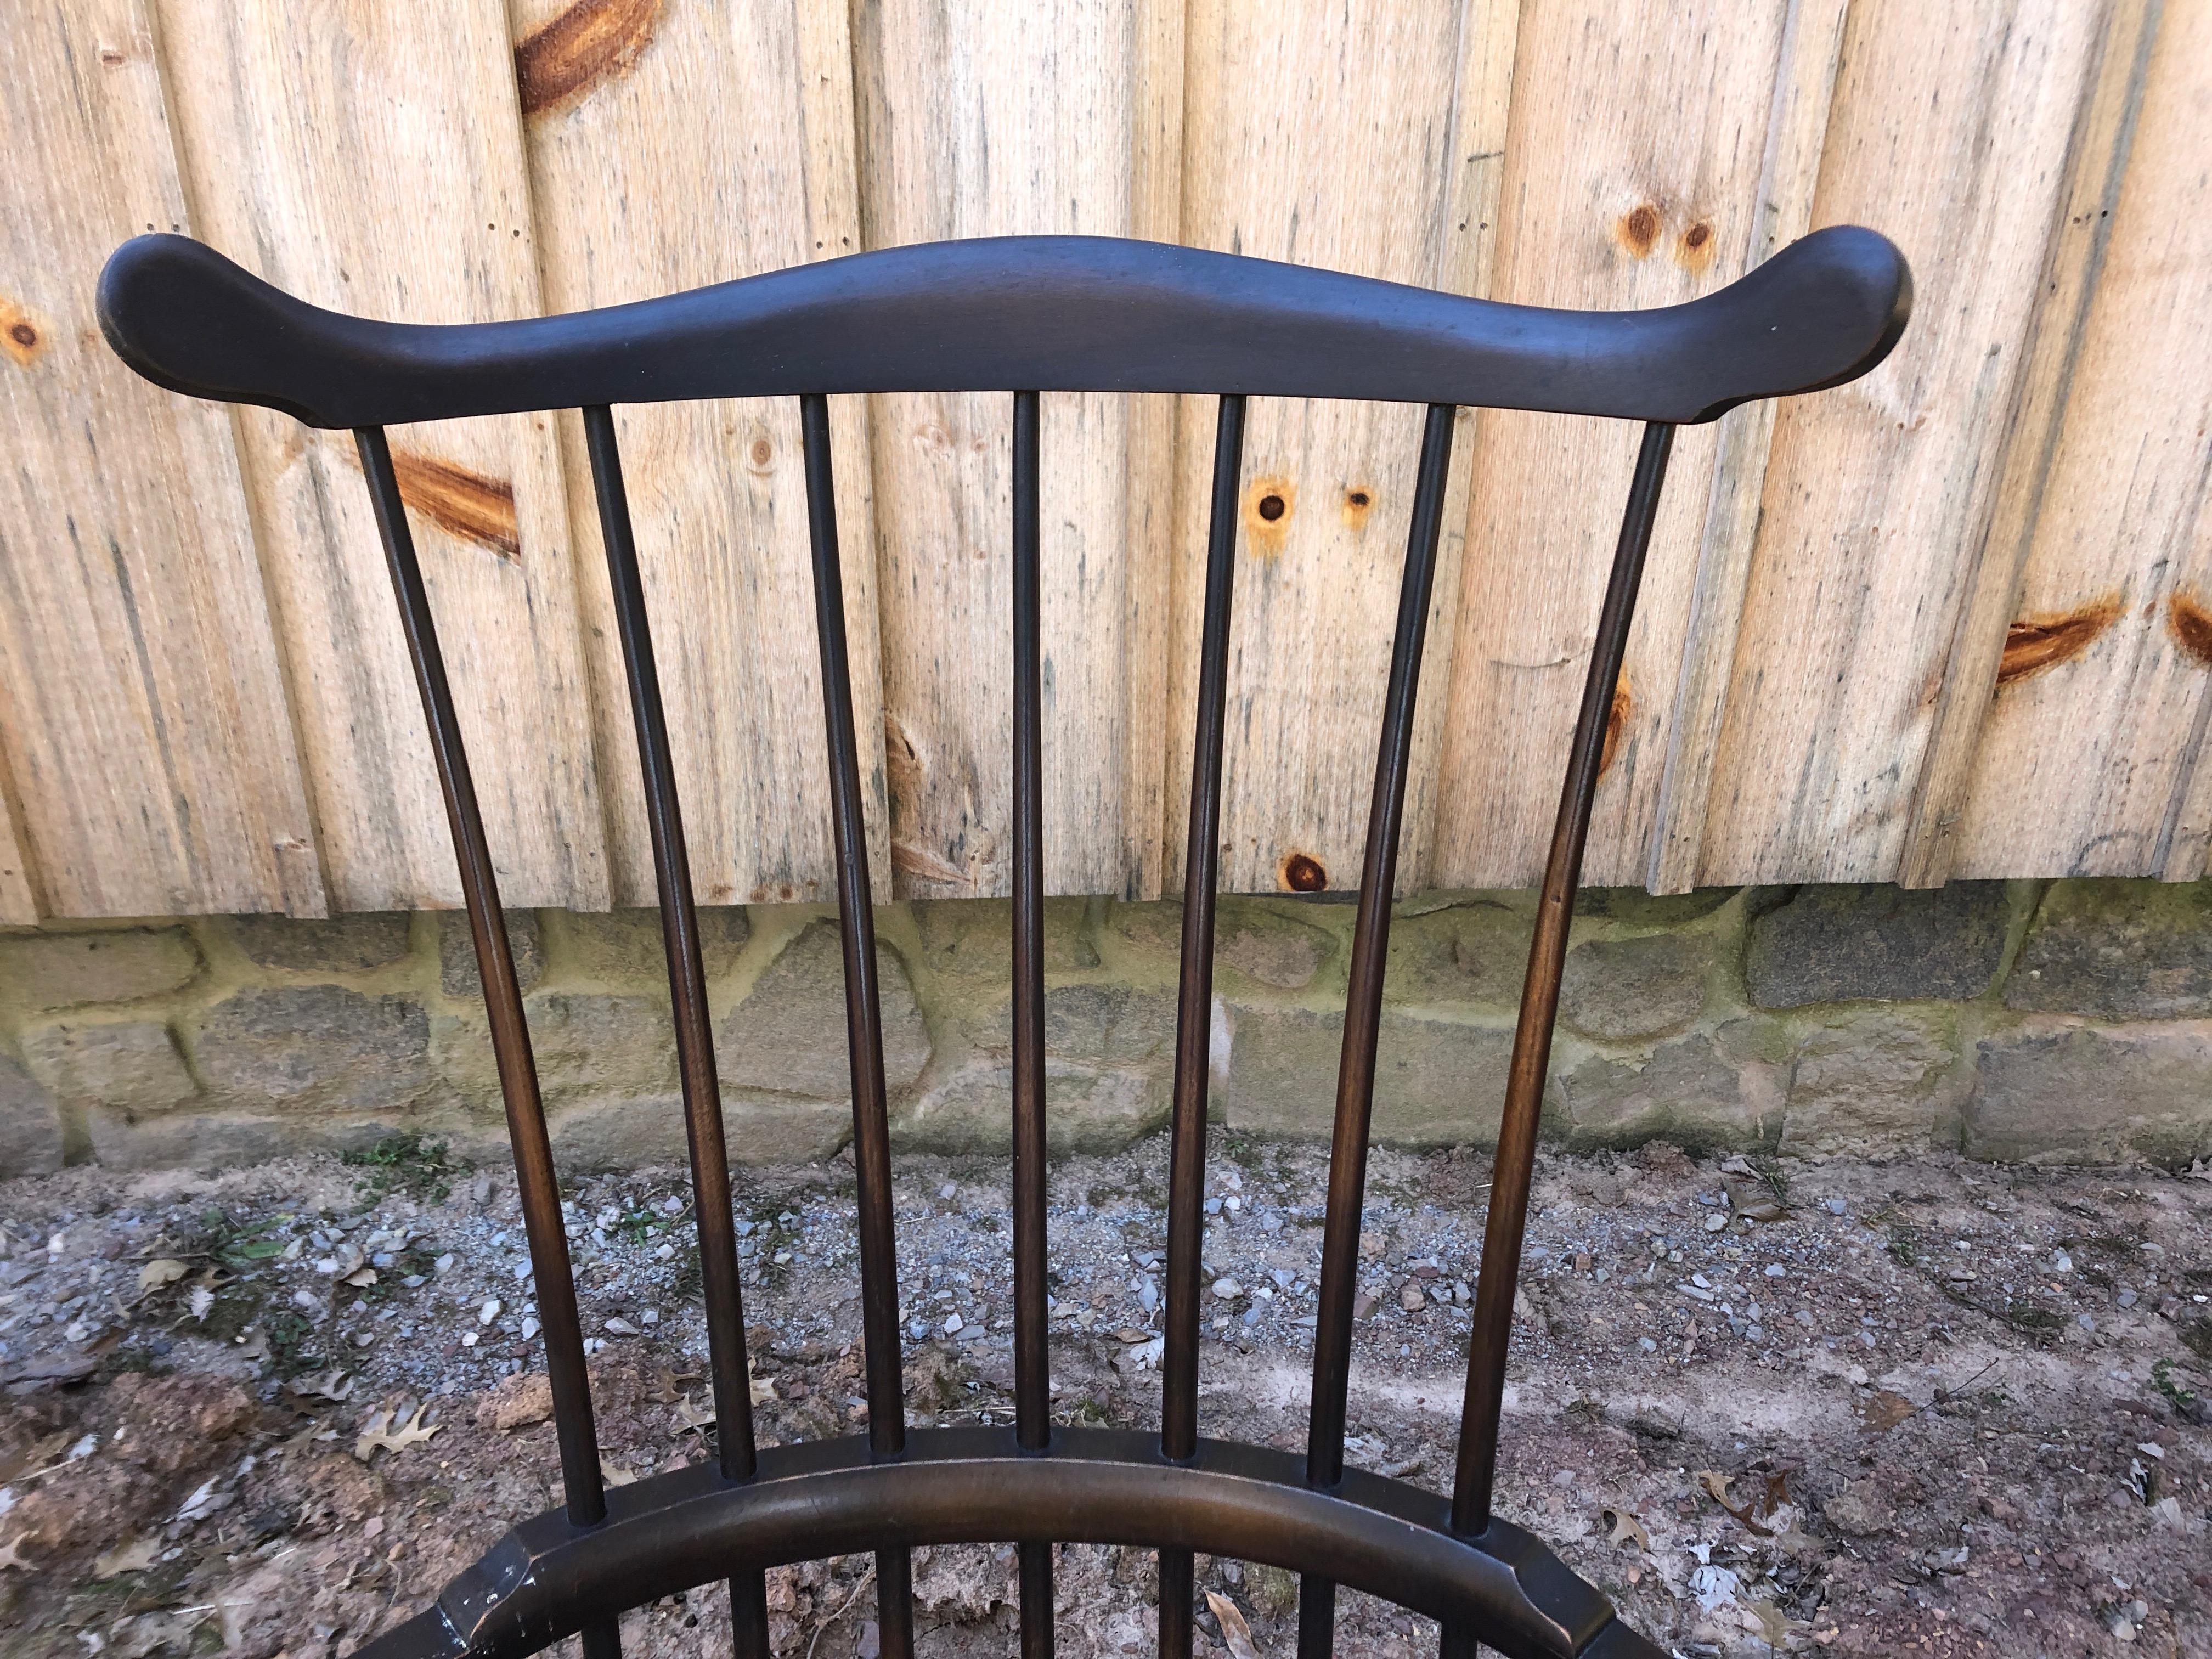 Beautifully crafted and elegant Windsor chair having saddle seat, thin spindles of ebonized wood, comb back and turned legs. By W F Whitney, Ashburnam MA. Circa 1930
Arm height 26.5
Measures: Seat width 21, seat depth 17.25.